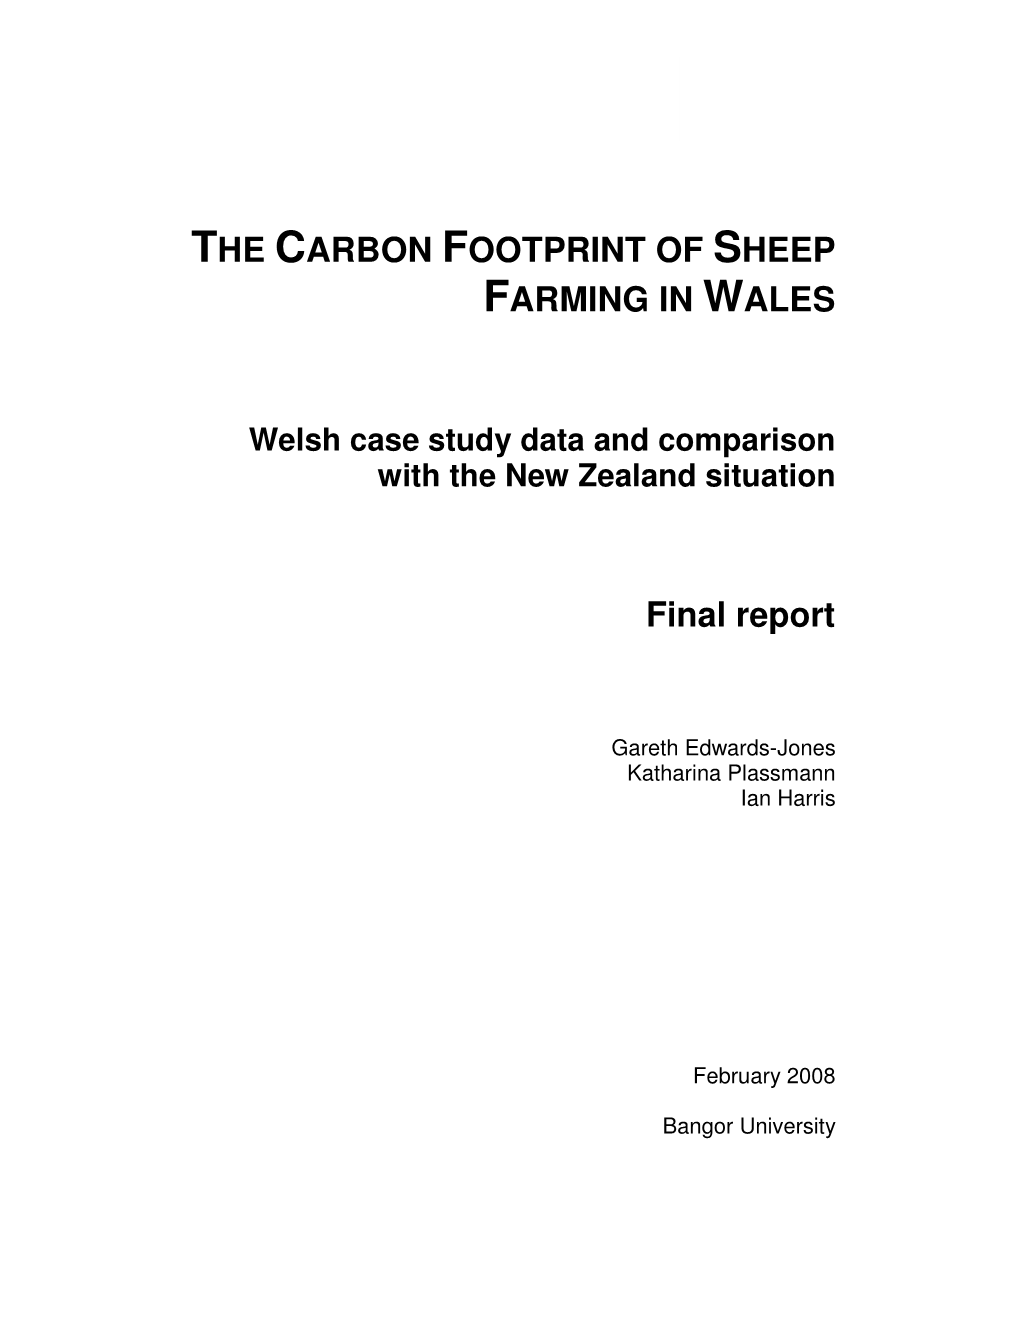 THE CARBON FOOTPRINT of SHEEP FARMING in WALES Final Report